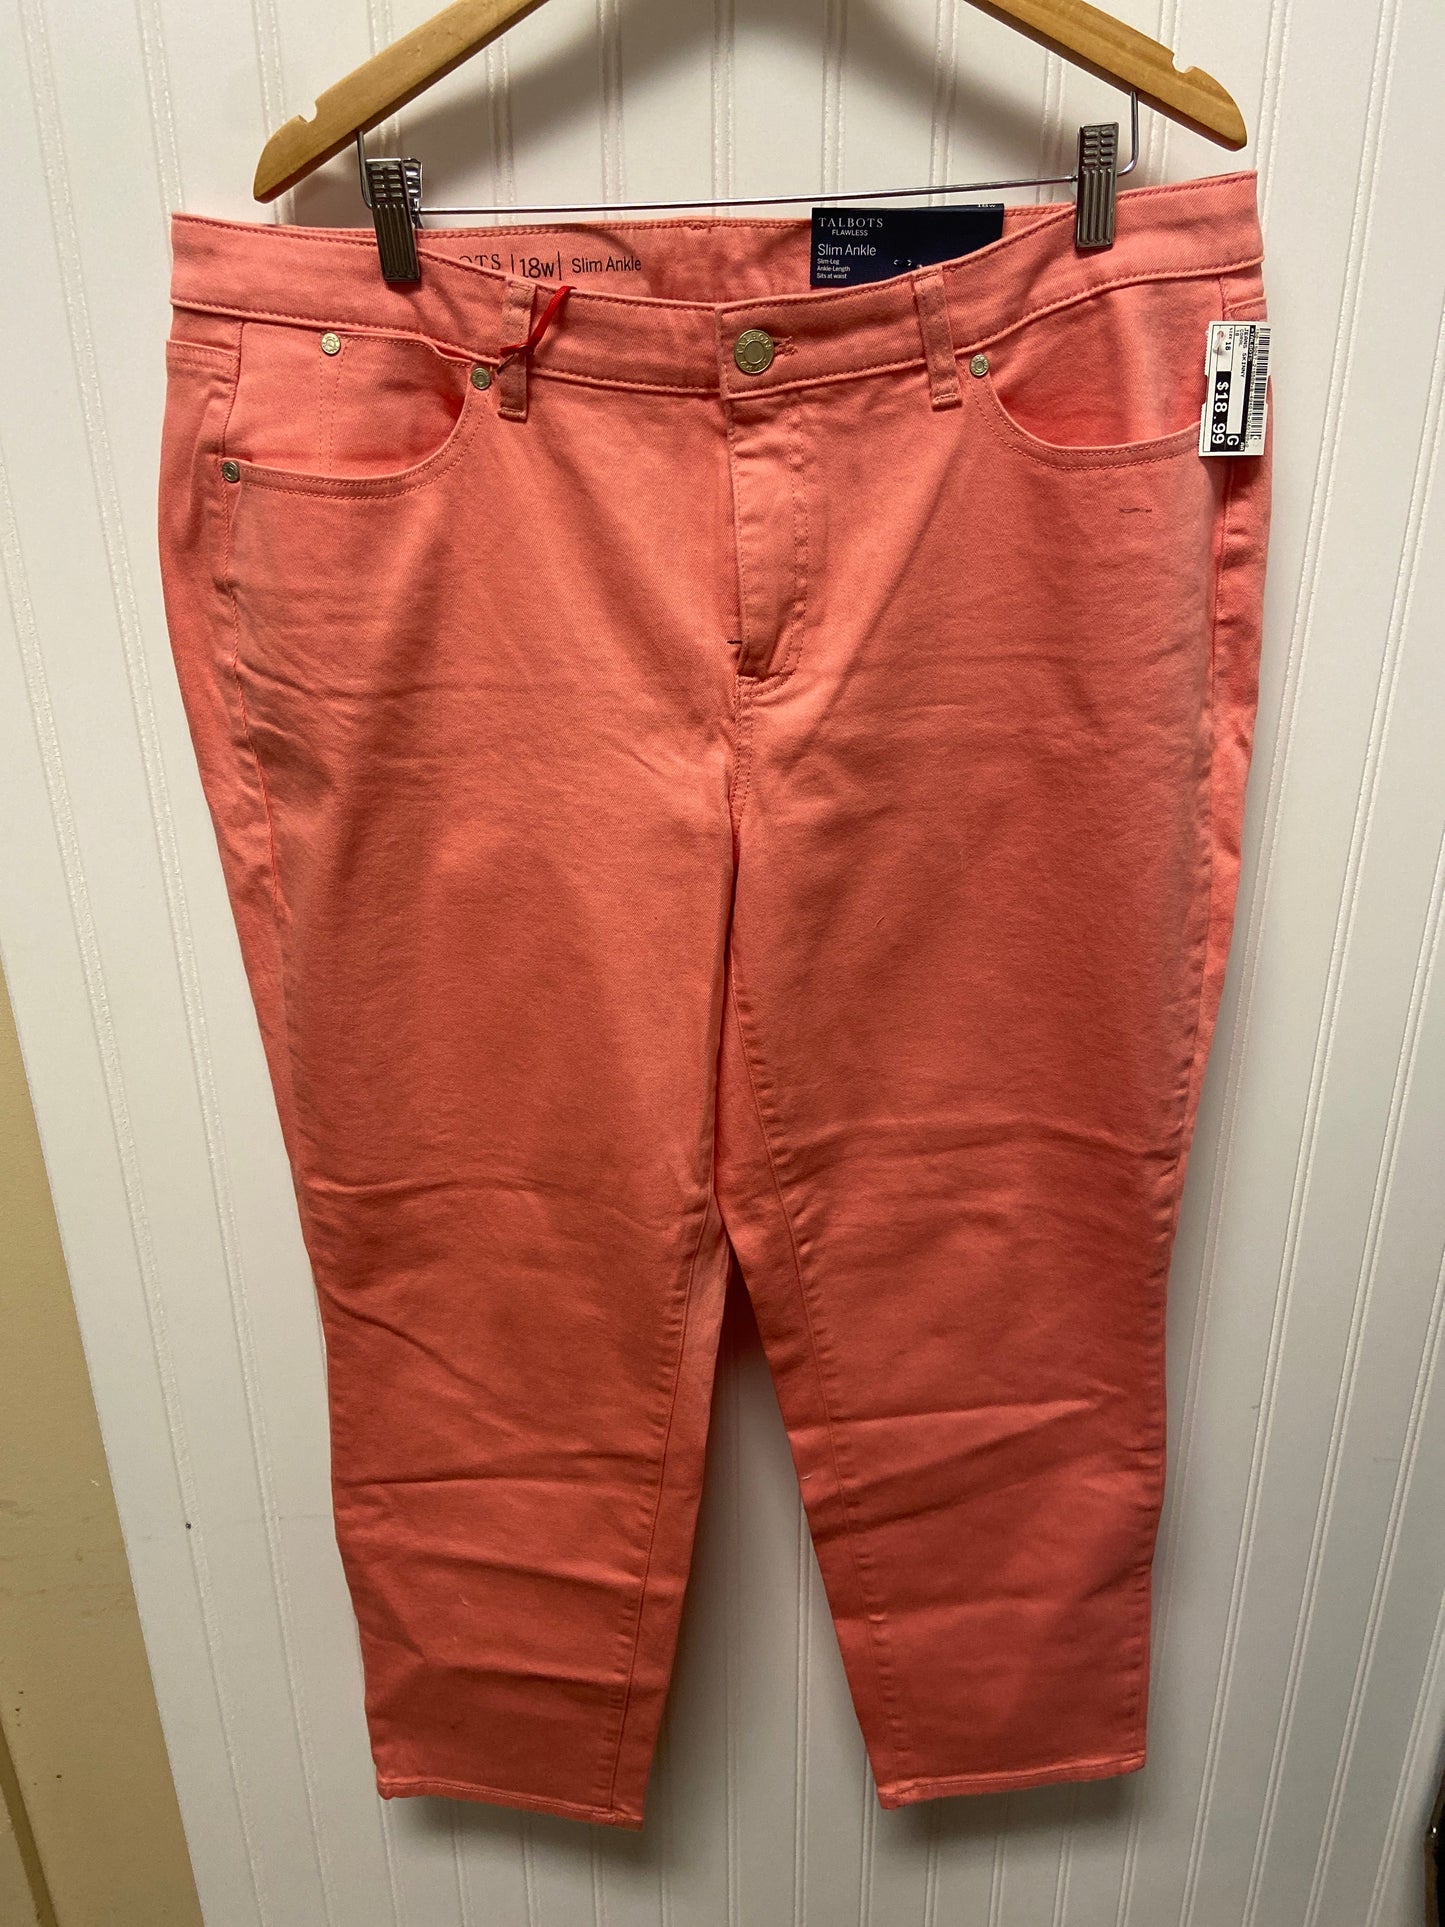 Coral Jeans Skinny Talbots, Size 18